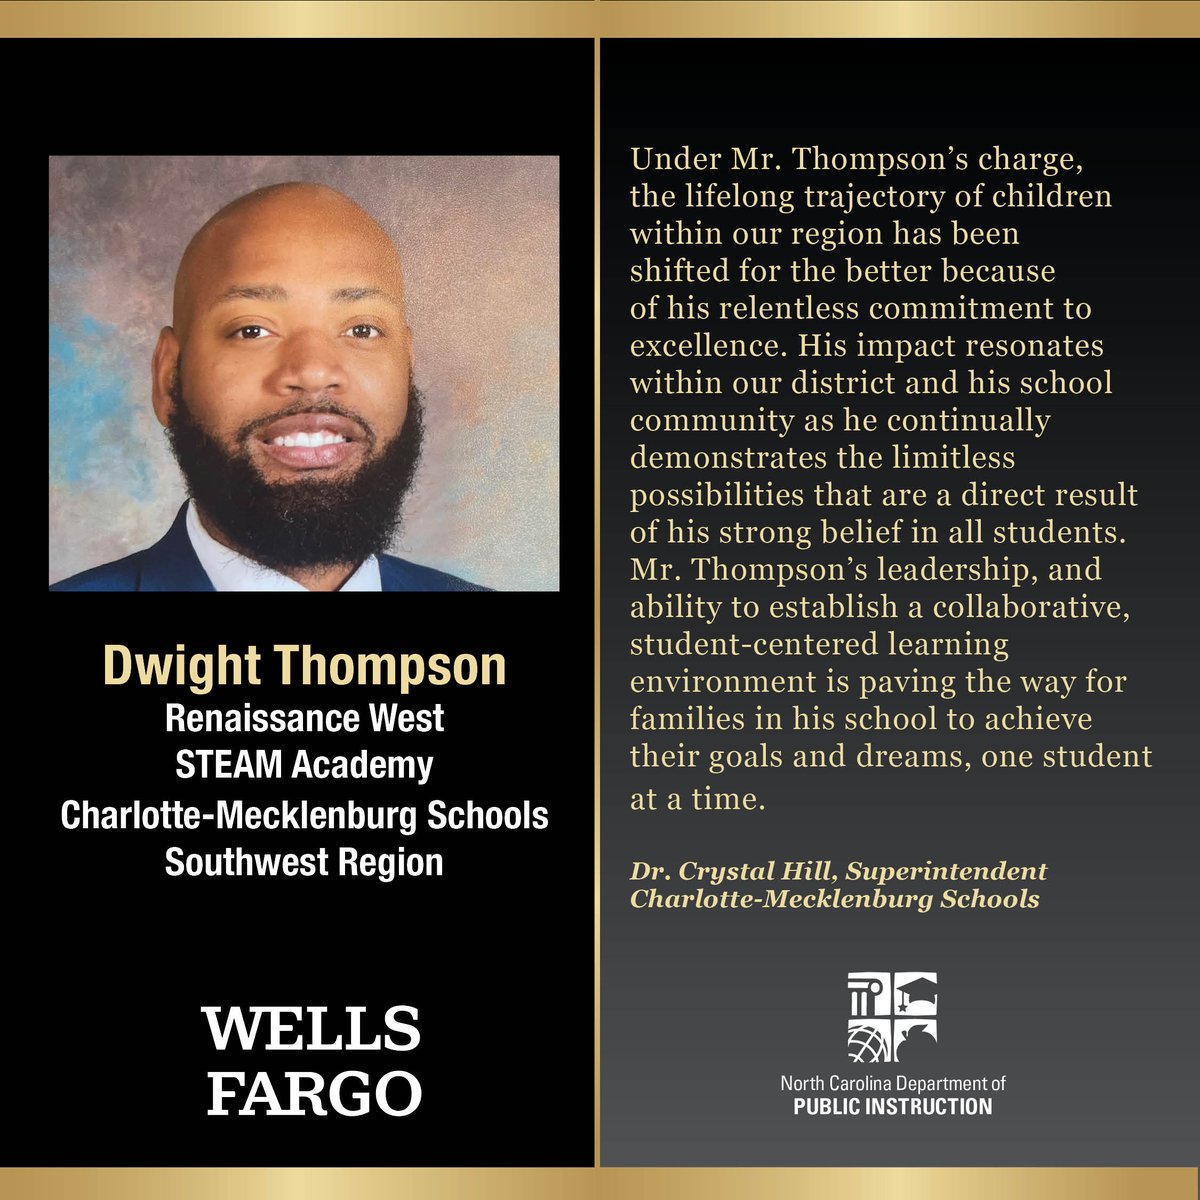 Friday is the day for the big reveal! Who will be the @WellsFargo 2024 NCPOY? Meet our SW Region POY Dwight Thompson. Join us May 24 at 12 pm for pre-show & NCPOY ceremony livestreams - youtube.com/ncpublicschools & facebook.com/ncpublicschools with support from @EquitableFin & @MyPBSNC.